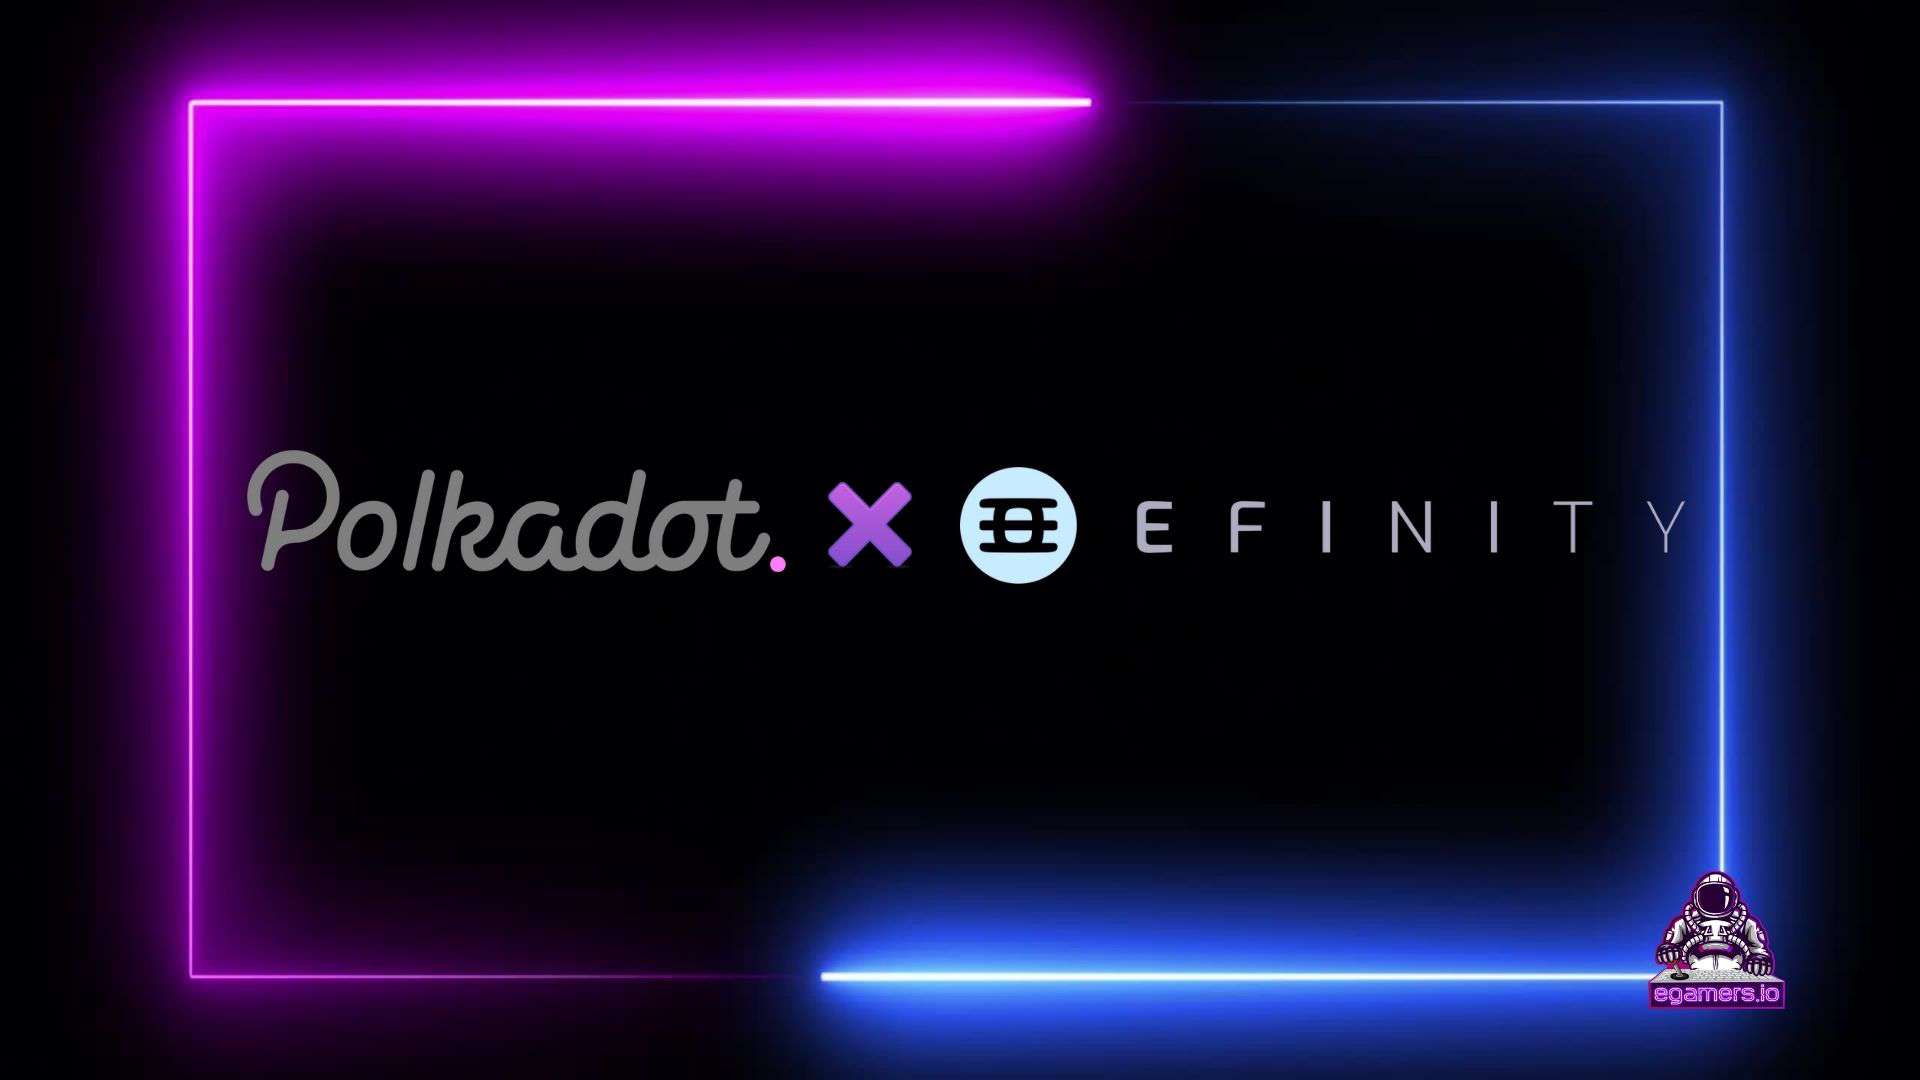 Untitled design 1 Enjin closed 2020 by achieving a great milestone for its Efinity parachain as it won the sixth auction in Polkadots crowd loan and can now proceed with further development and deployment.